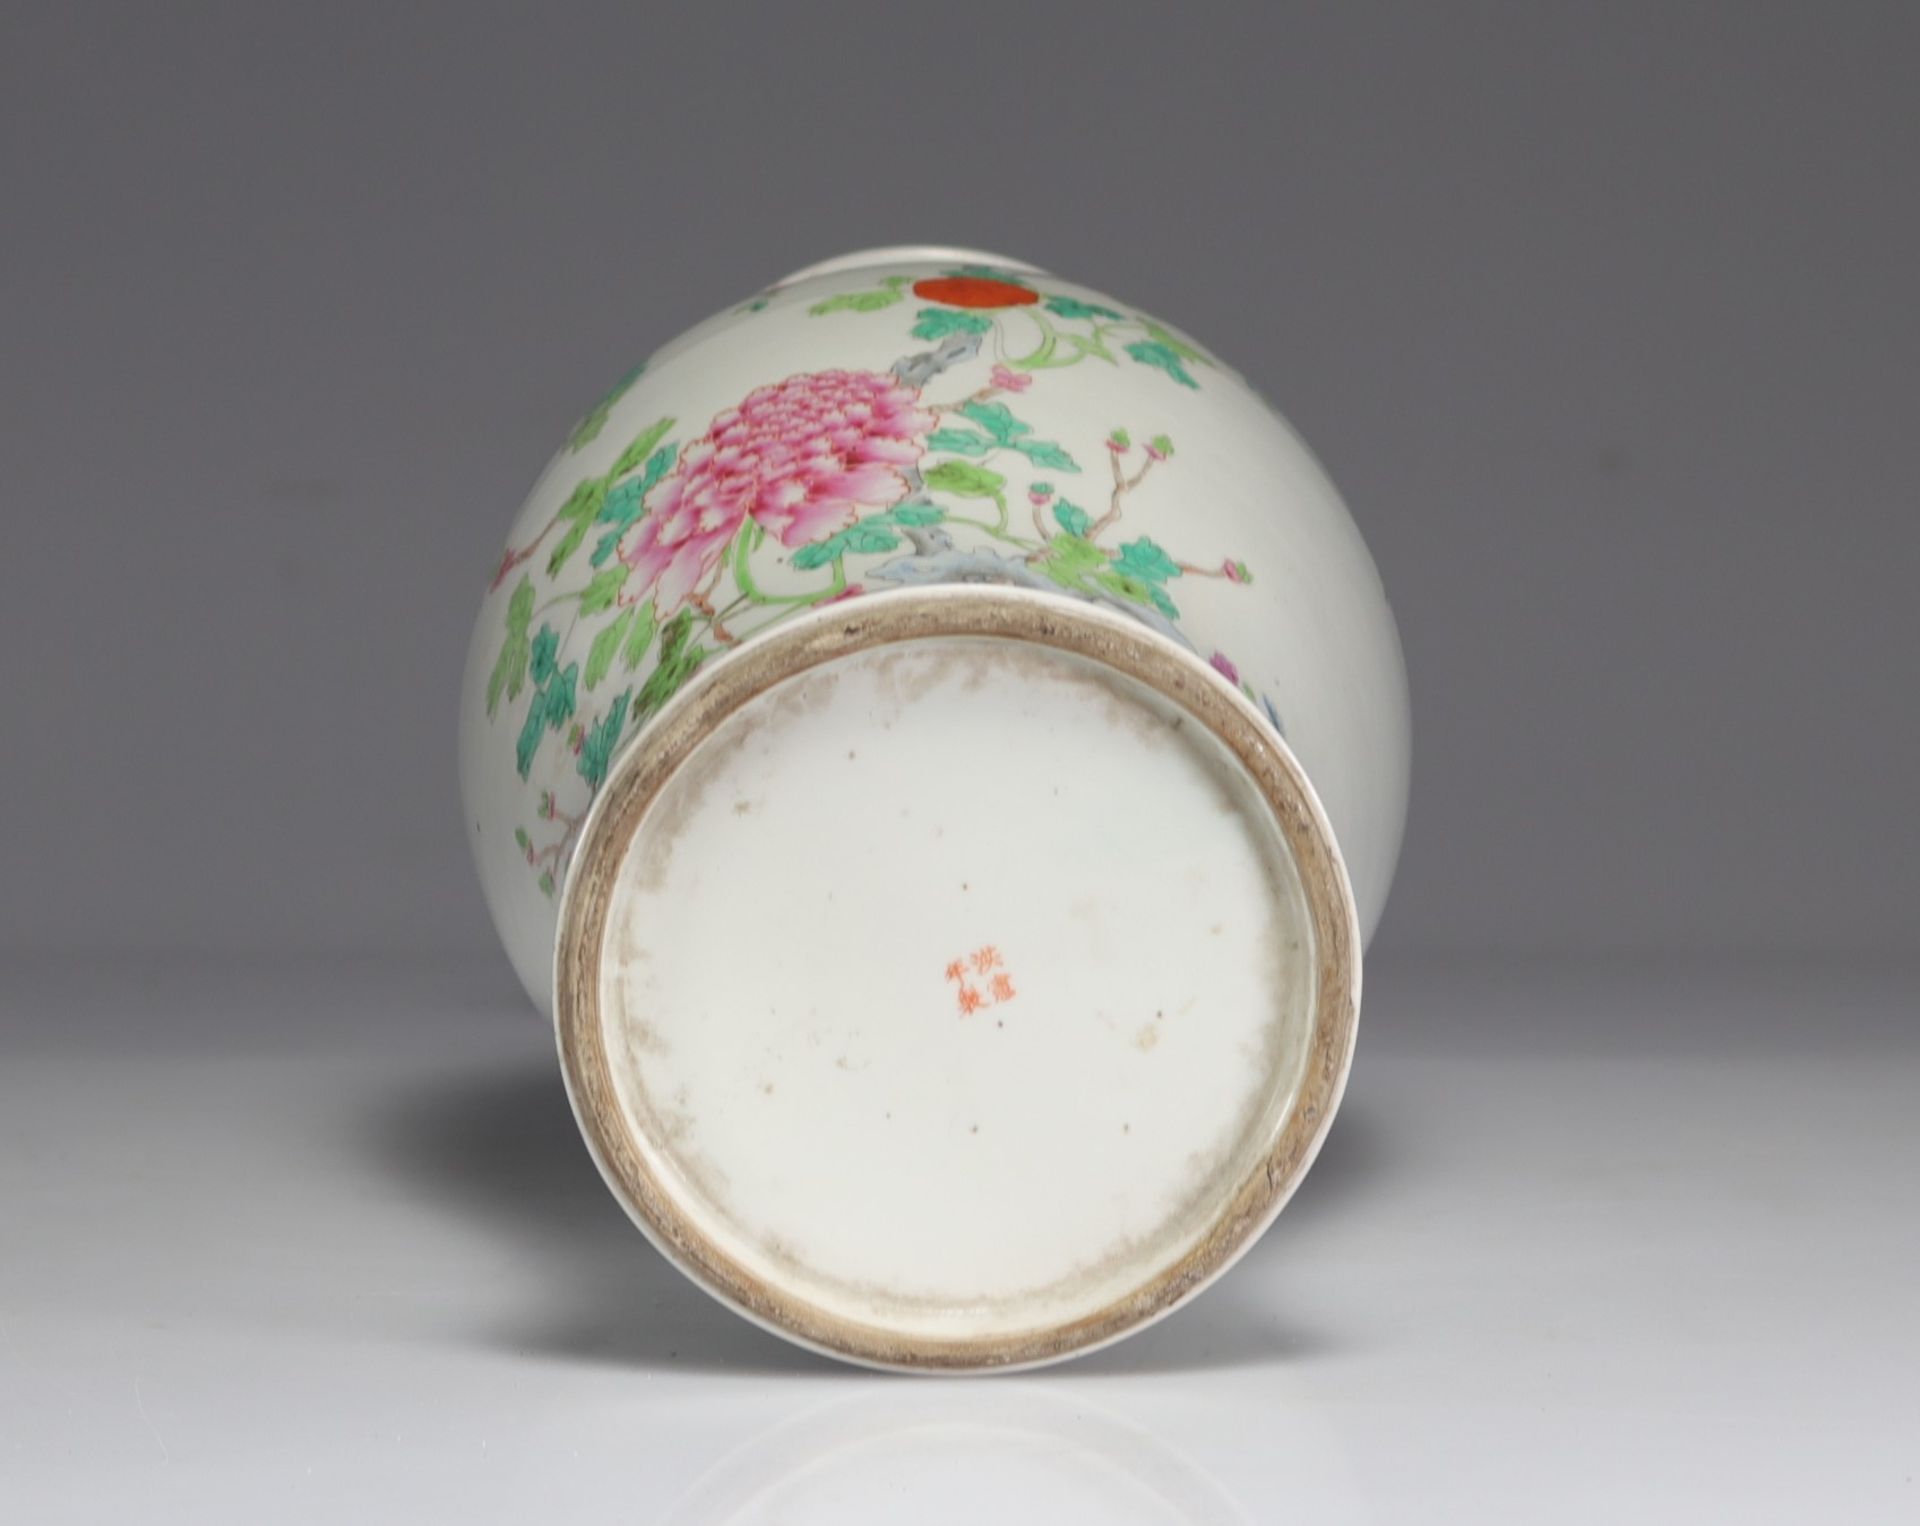 Famille rose porcelain vase decorated with flowers and birds - Image 4 of 5